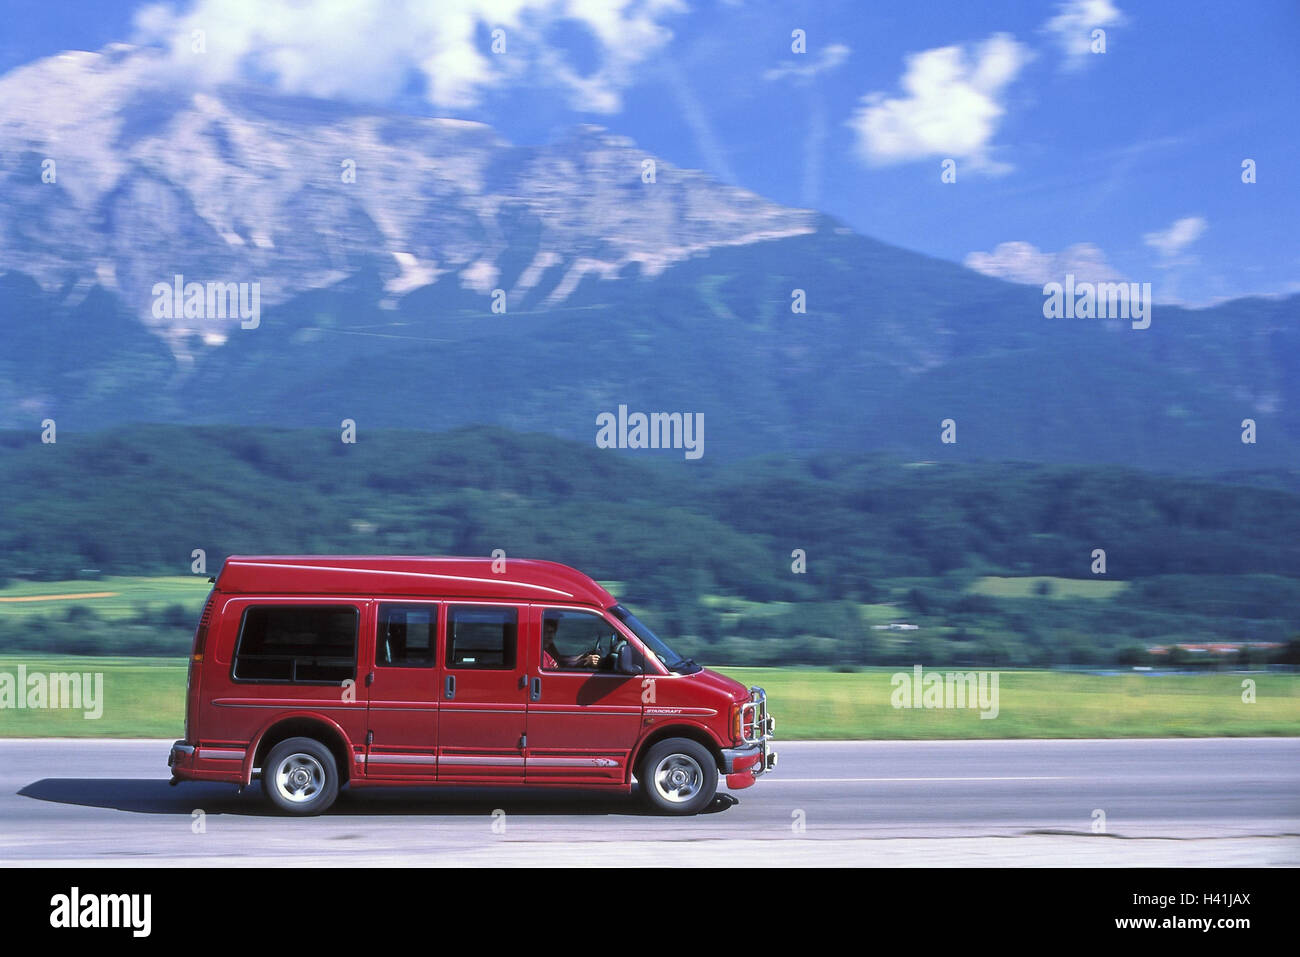 Country road, Chevrolet, van bus, year manufacture in 1990-2000, summer, street, meadows, mountain landscape, minibus, street, excursion, minibus, autotypes, car, red, go, preview Stock Photo